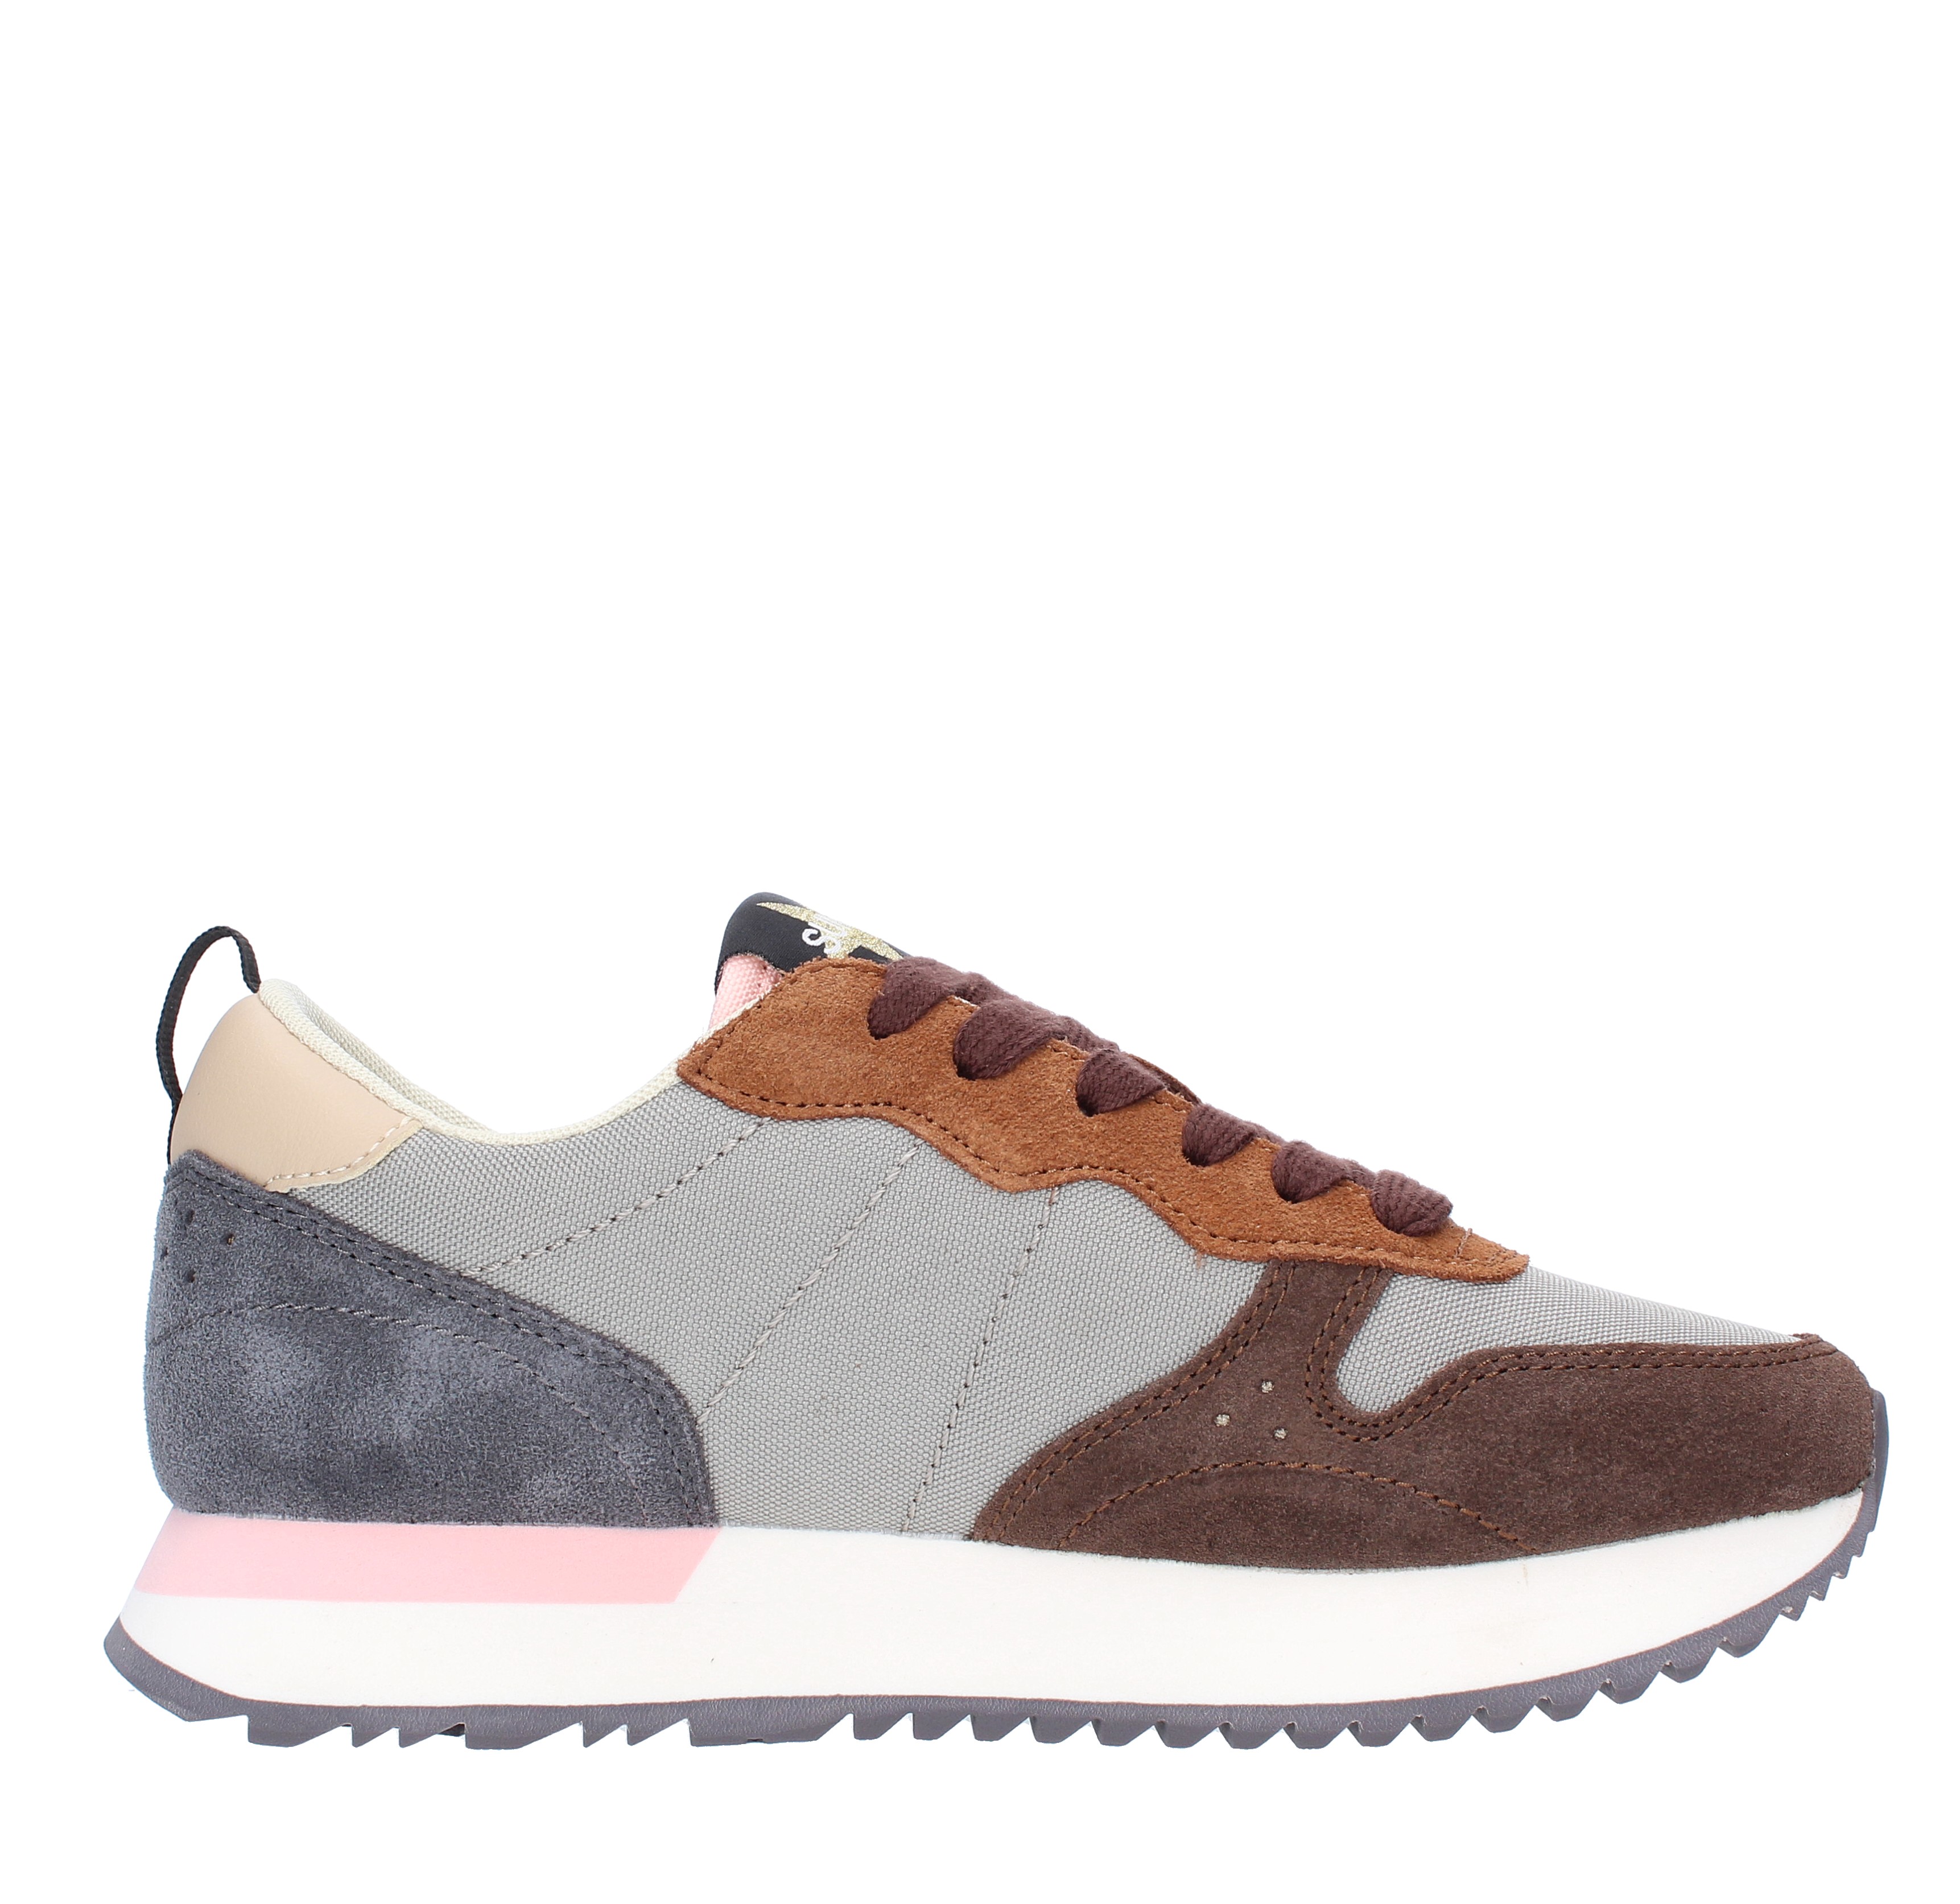 Z43209 SUN68 trainers in leather, suede and breathable fabric SUN68 | Z43209GRIGIO-MARRONE